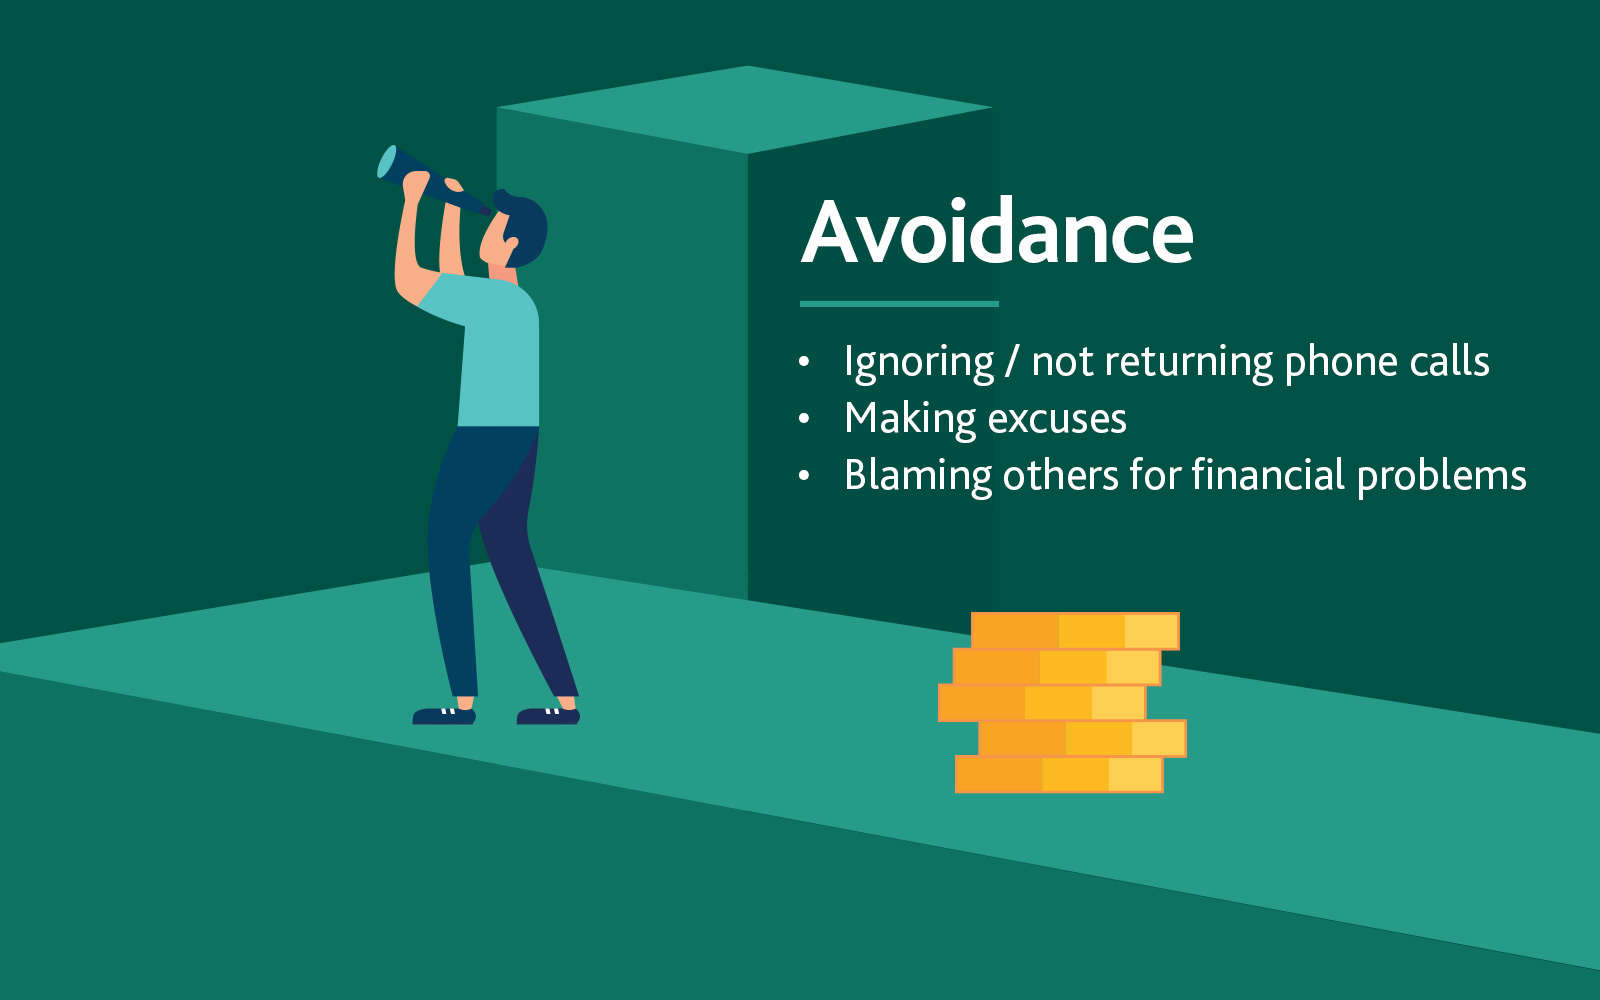 Avoidance: Ignoring/not returning phone calls, making excuses, blaming others for financial problems